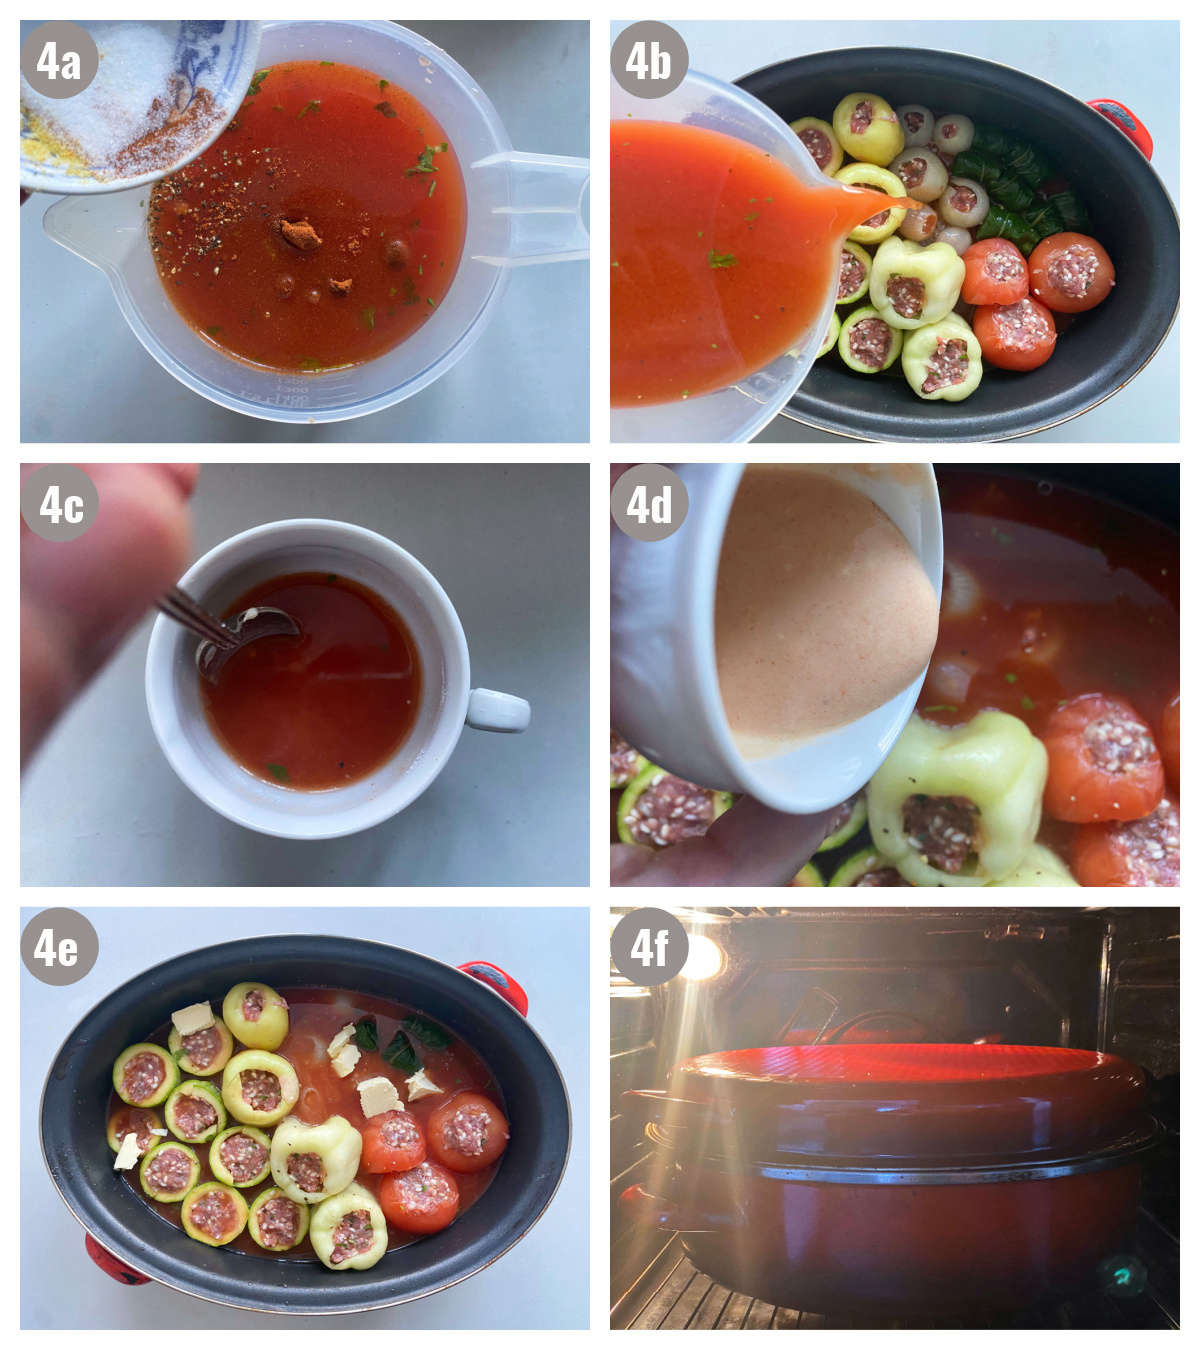 Six photographs, two by two, one is with red sauce in a pitcher with seasonings, second red sauce is being poured over stuffed vegetables, third photograph is of another red sauce mixed with a spoon, fourth photographs  is that second sauce poured over the stuffed veggies, fifth photograph is of stuffed veggies in a pan with sauces, sixth photograph is of everything baked. 